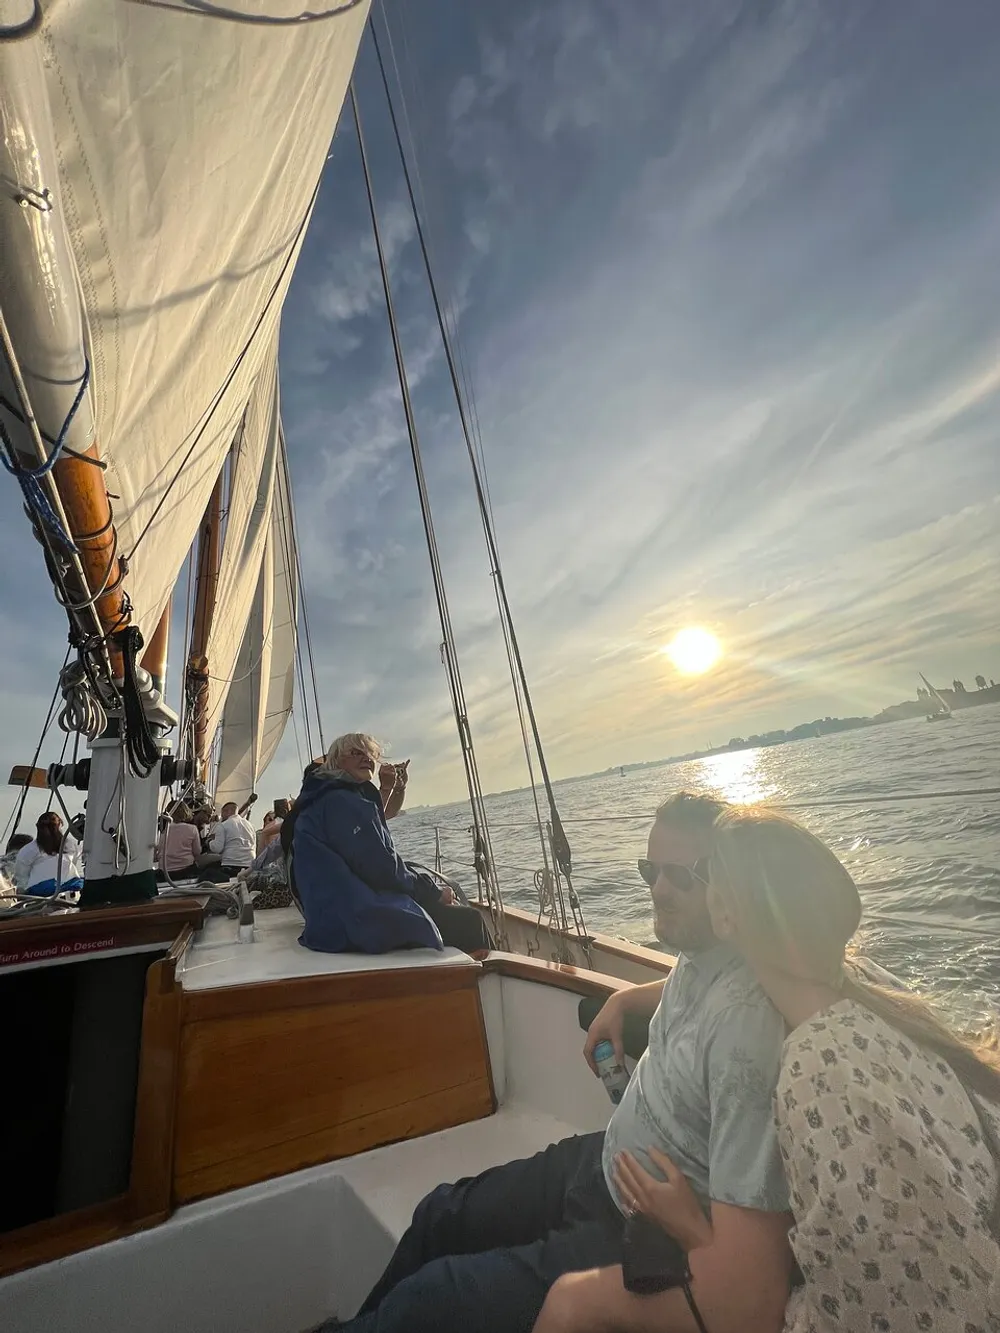 People are enjoying a serene sailboat ride at sunset with the sails hoisted against the backdrop of a calm sea and the setting sun